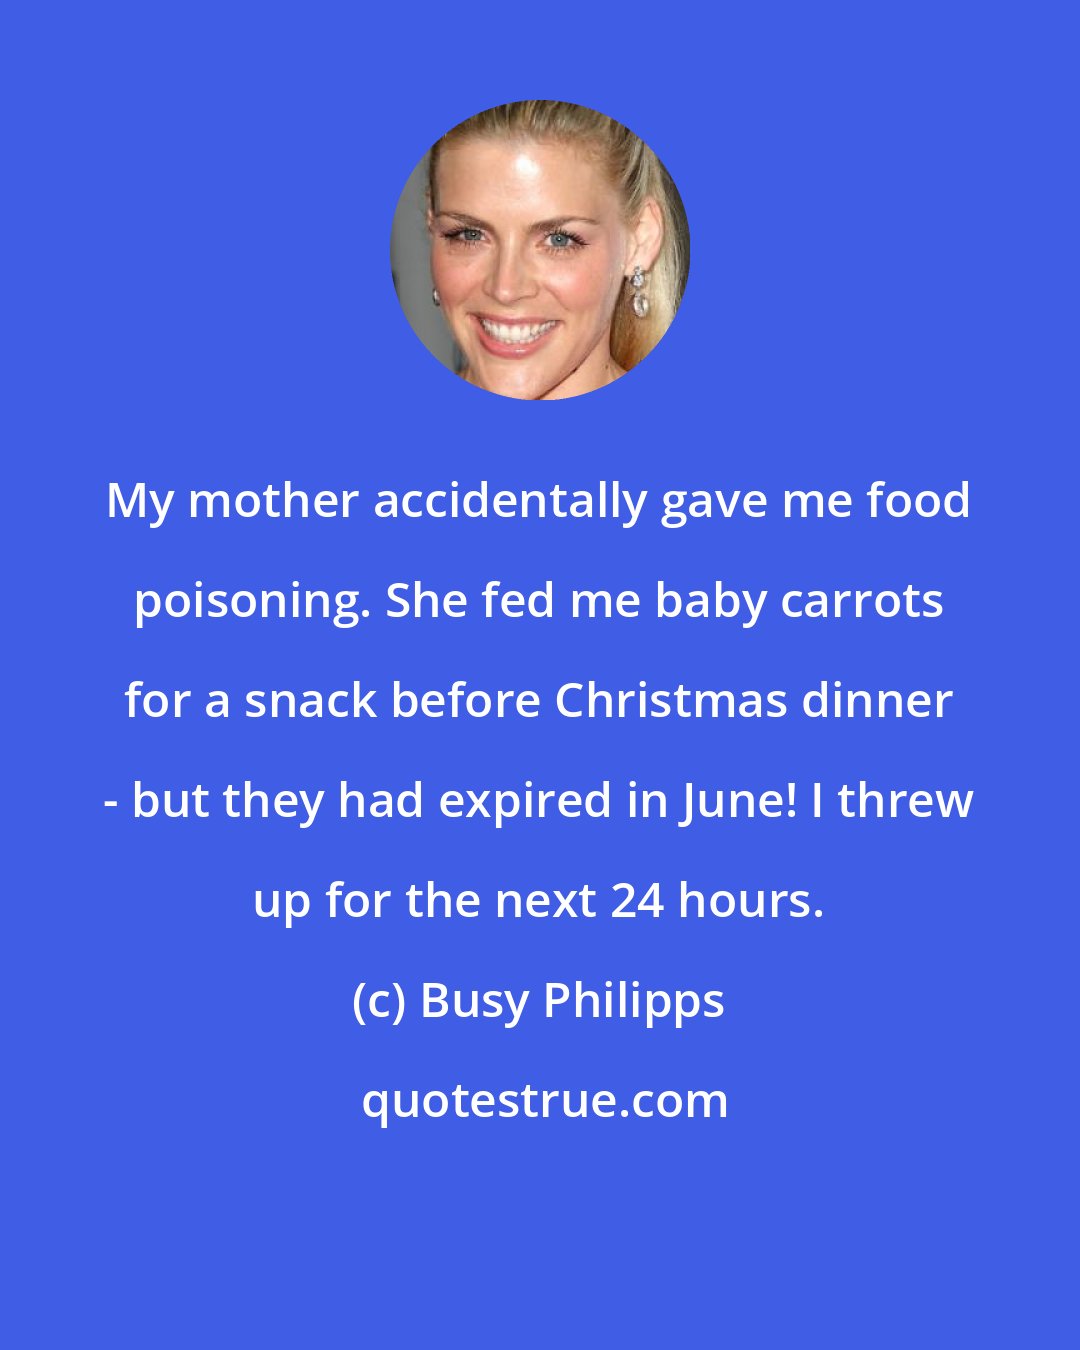 Busy Philipps: My mother accidentally gave me food poisoning. She fed me baby carrots for a snack before Christmas dinner - but they had expired in June! I threw up for the next 24 hours.